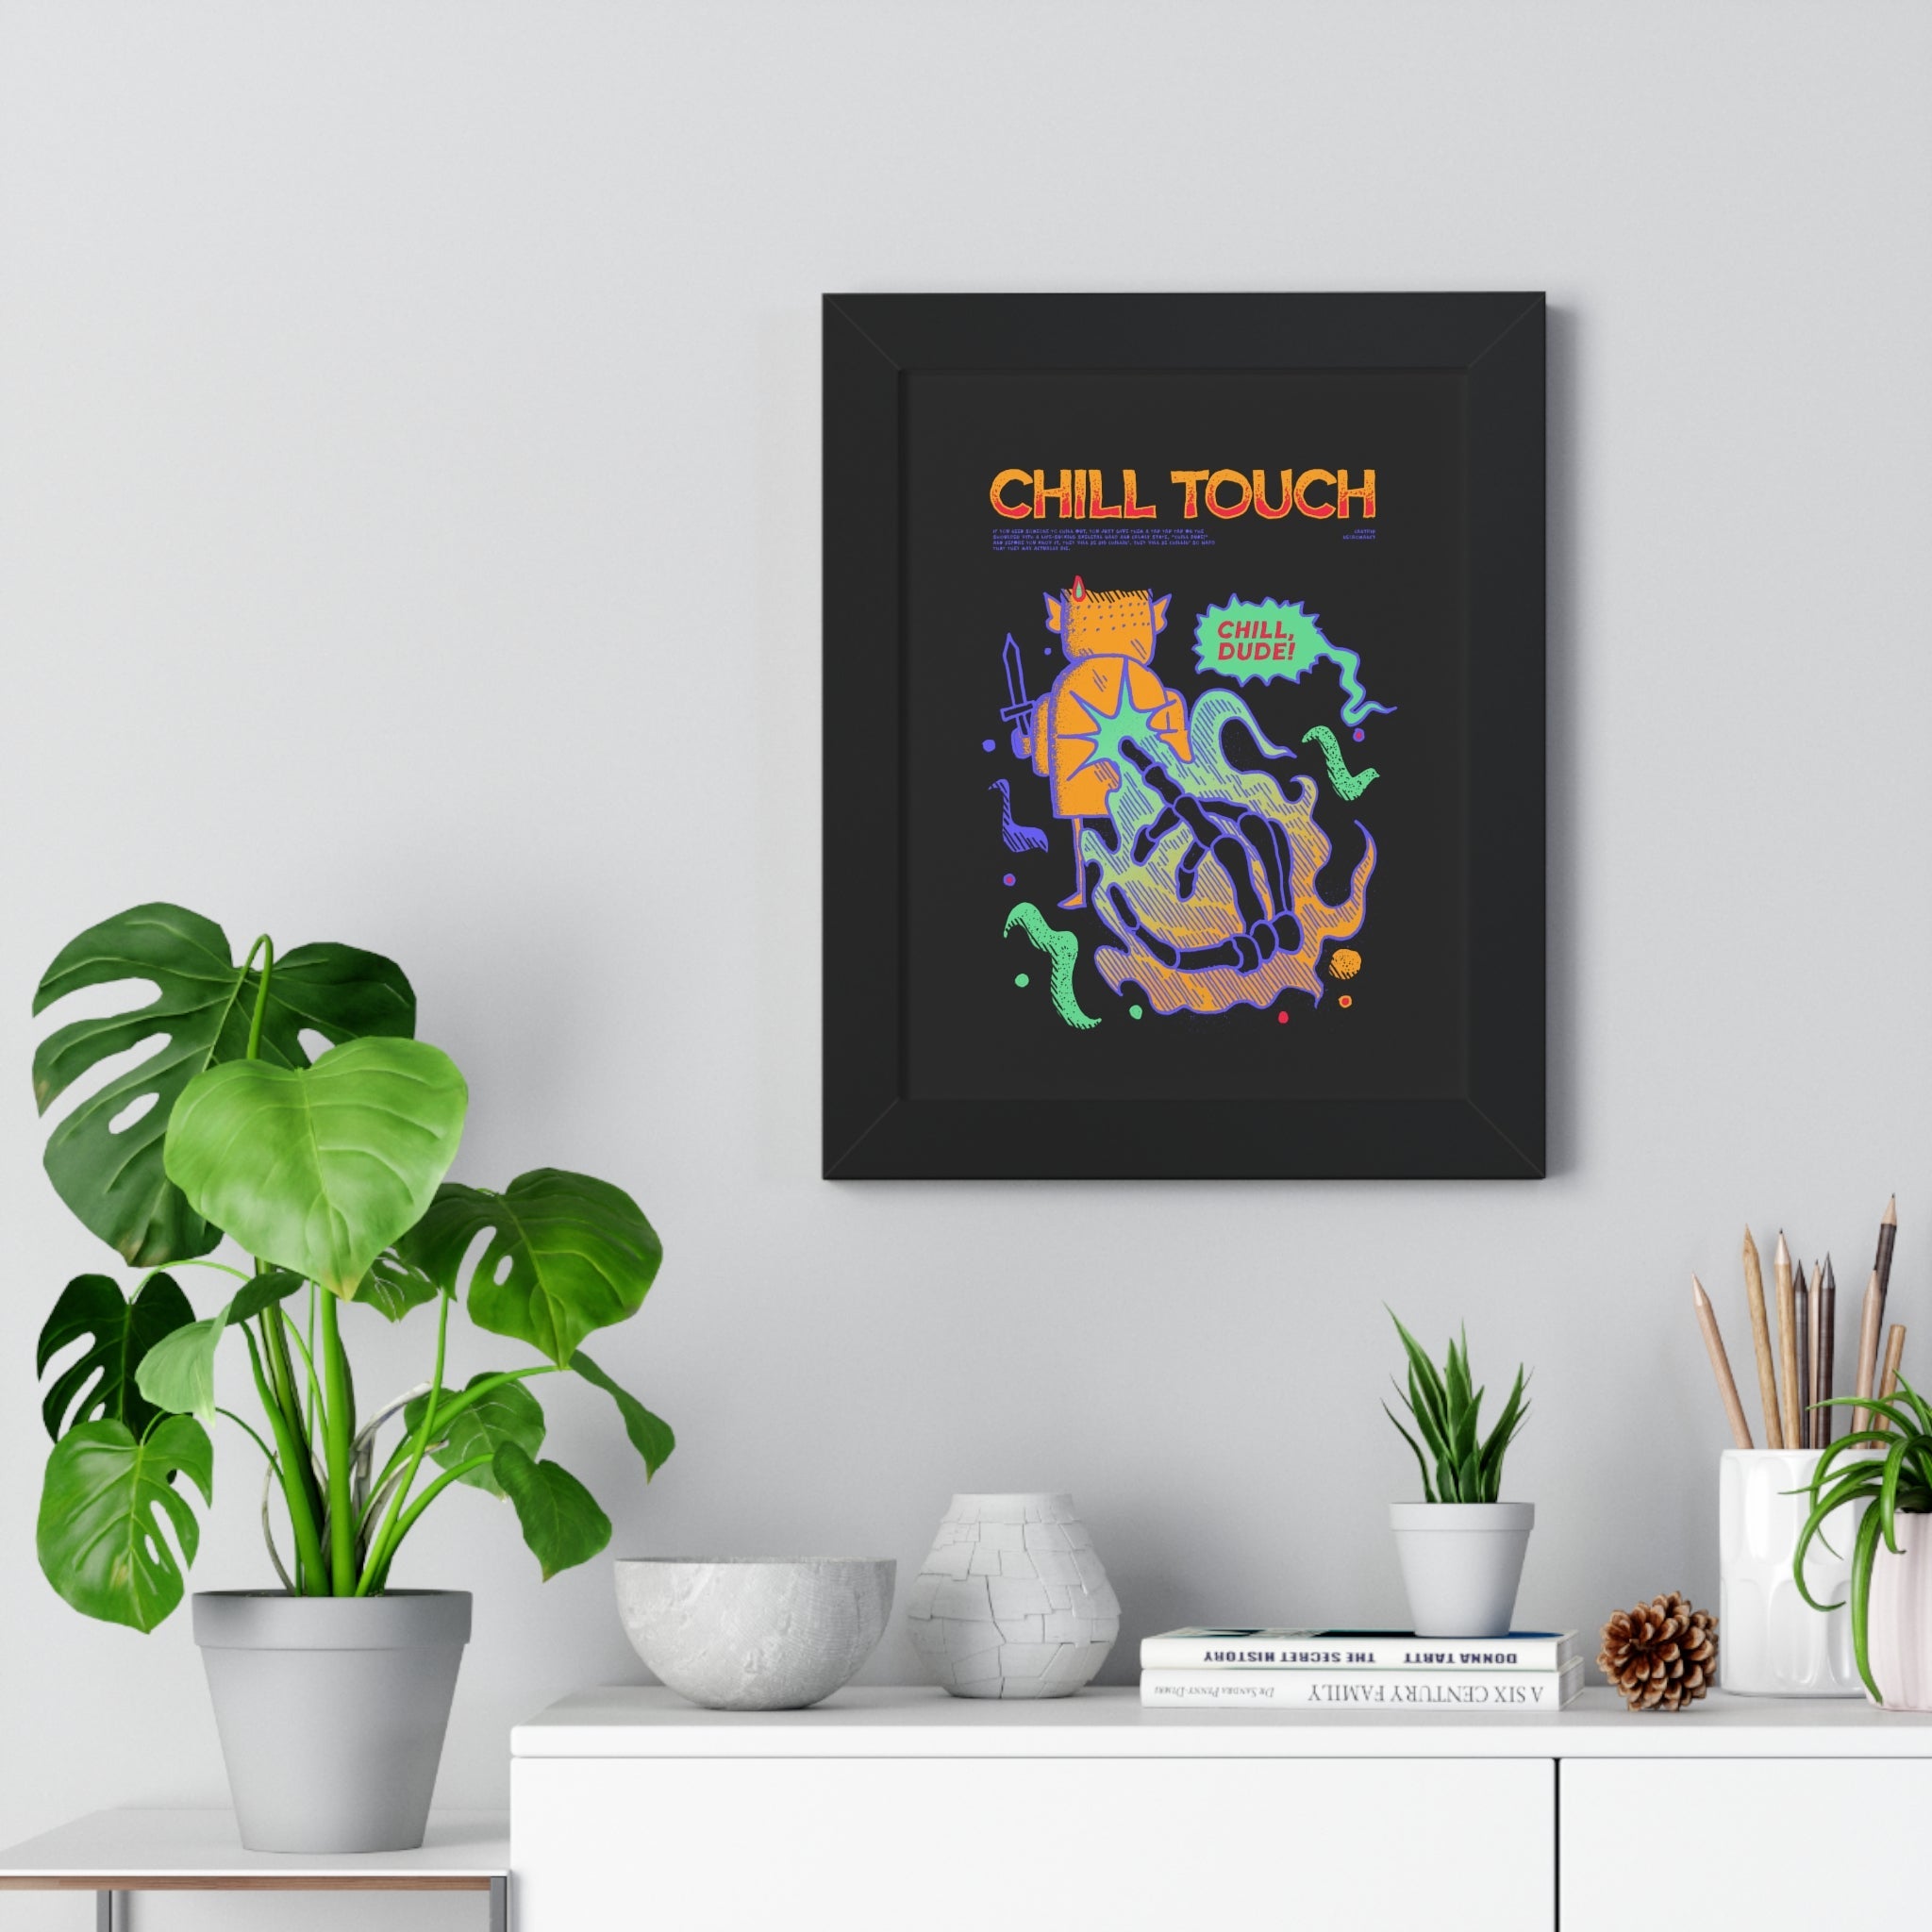 Chill Touch | Framed Poster - Framed Poster - Ace of Gnomes - 27712885544642864484